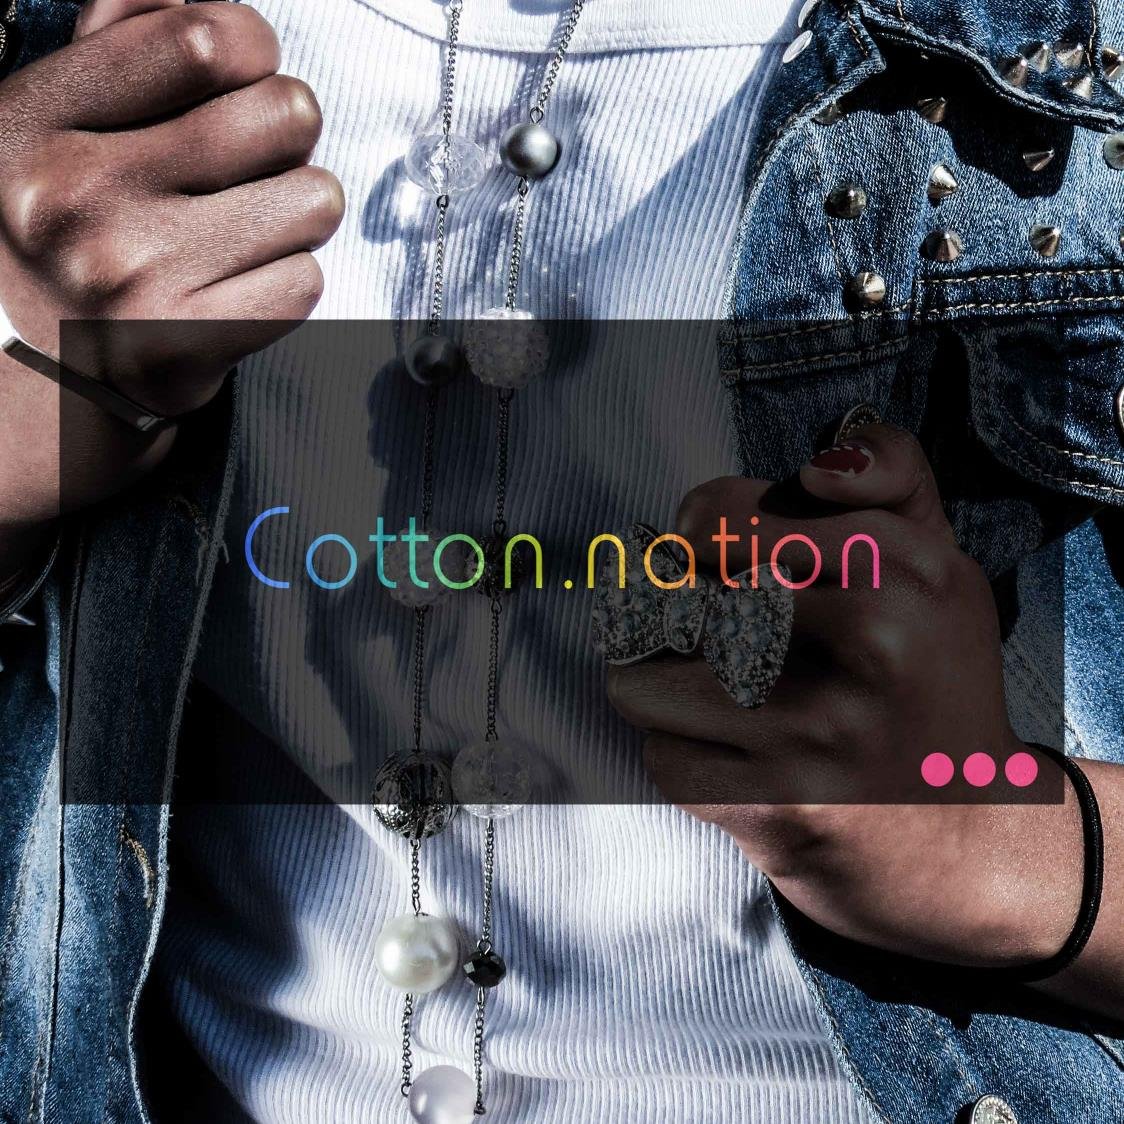 Contact: Thecottonnation@gmail.com